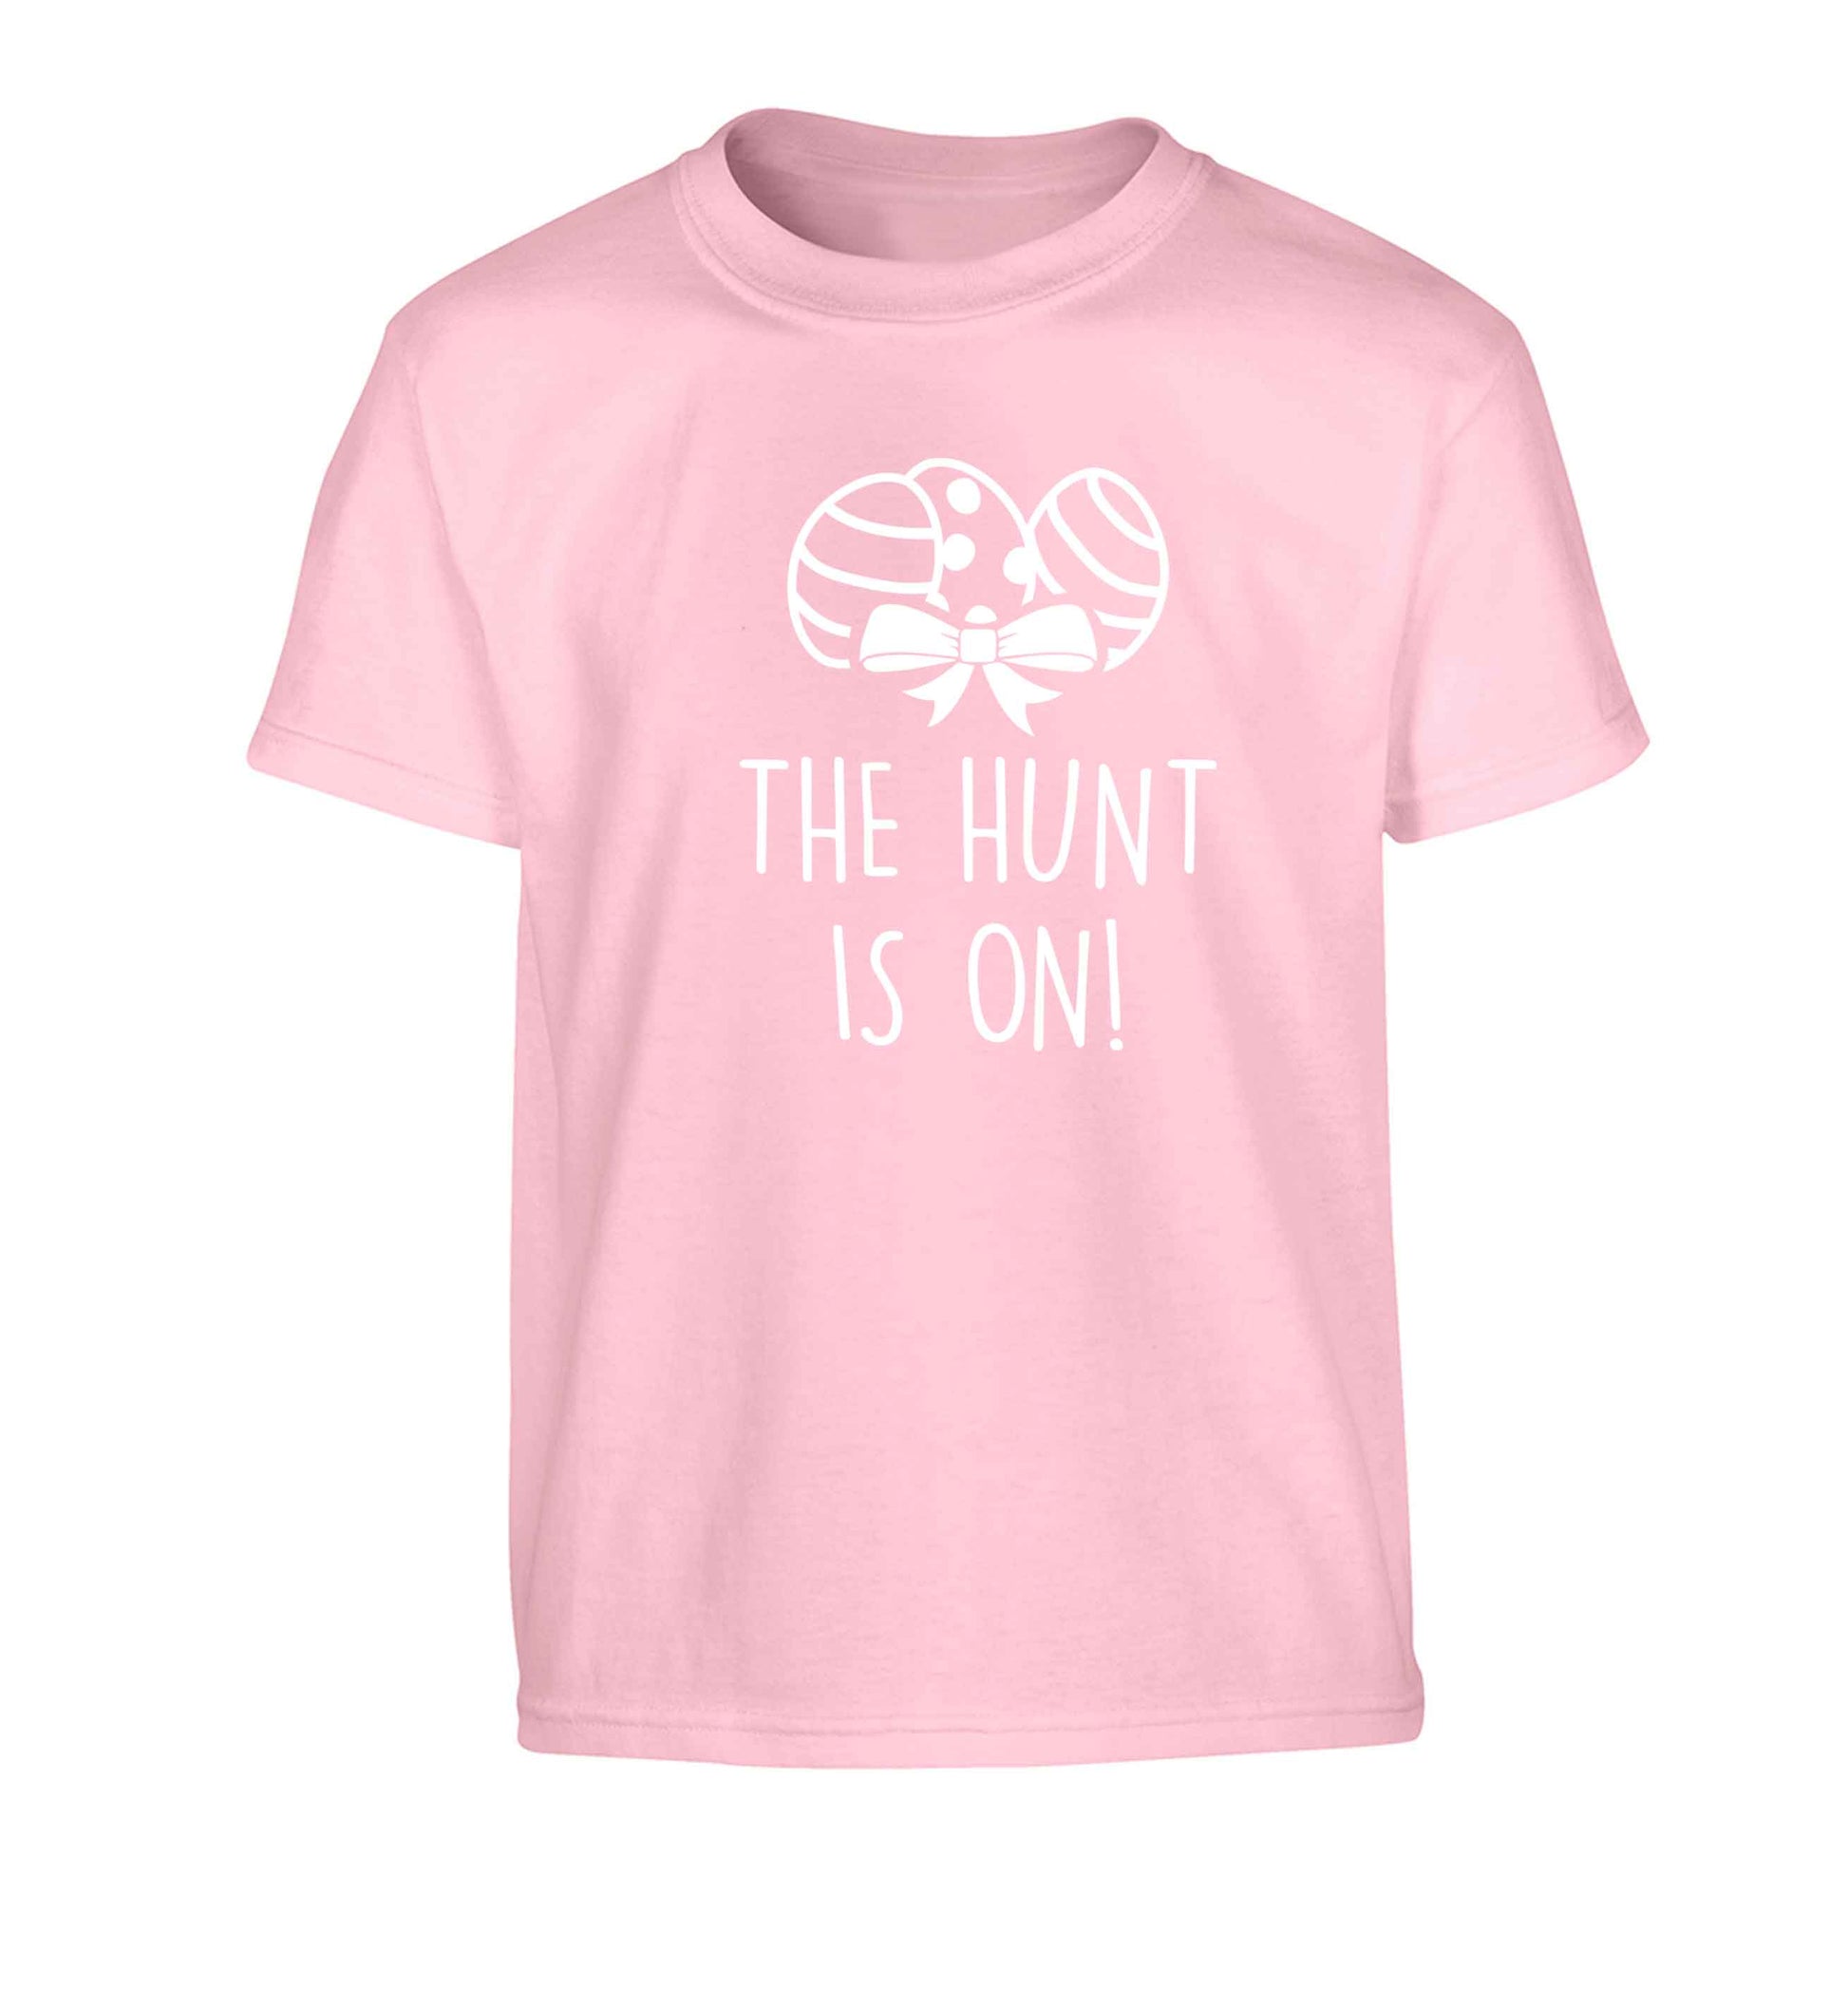 The hunt is on Children's light pink Tshirt 12-13 Years